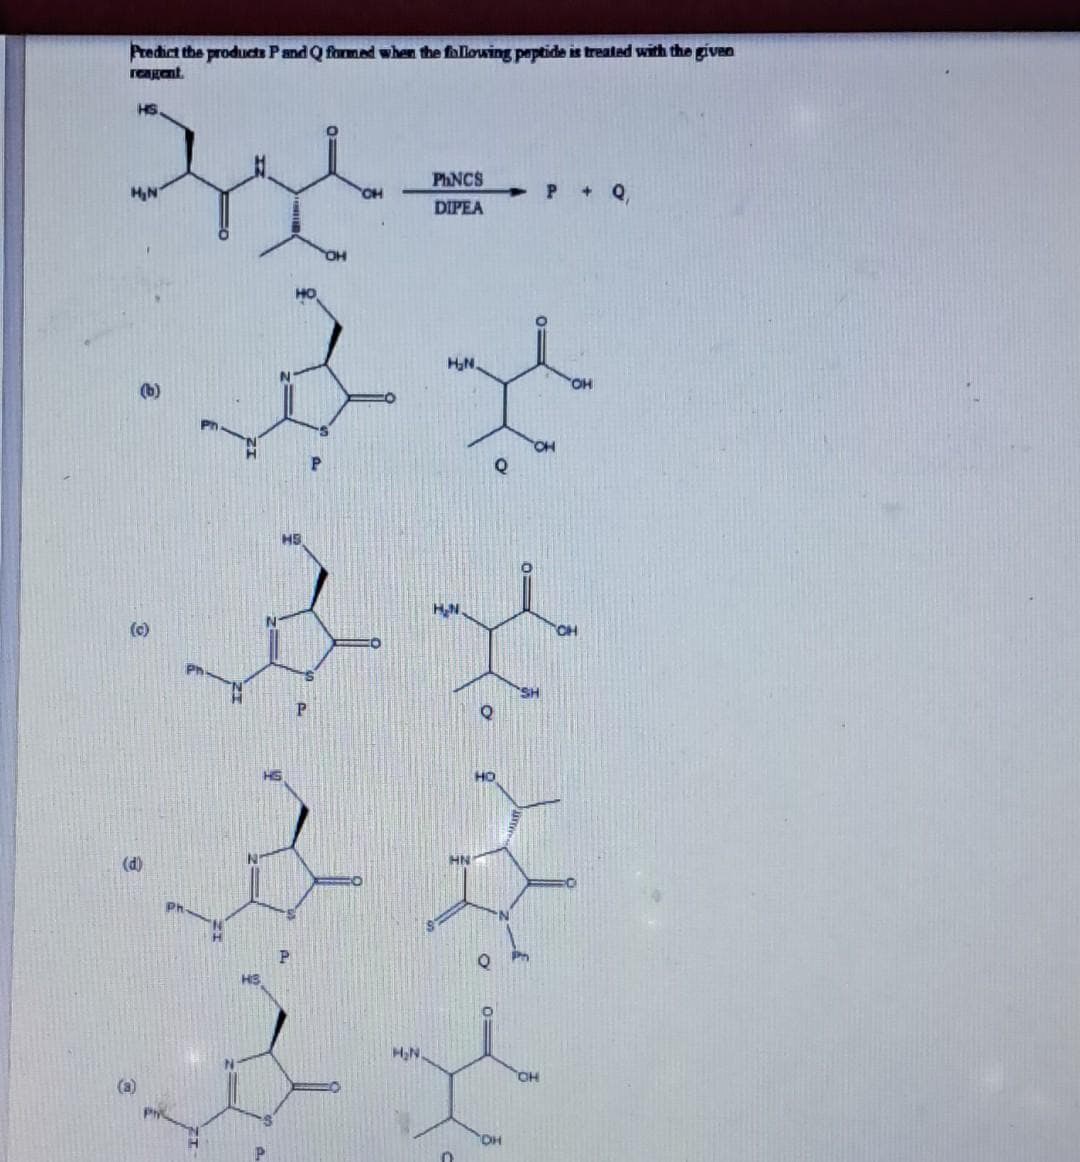 Predict the products P and Q formed when the following peptide is treated with the given
reagient.
HS.
H₂N
(b)
(c)
(d)
HS
P
P
OH
H₂N.
PhNCS
DIPEA
H₂N.
X
DH
P + Q
OH
CH